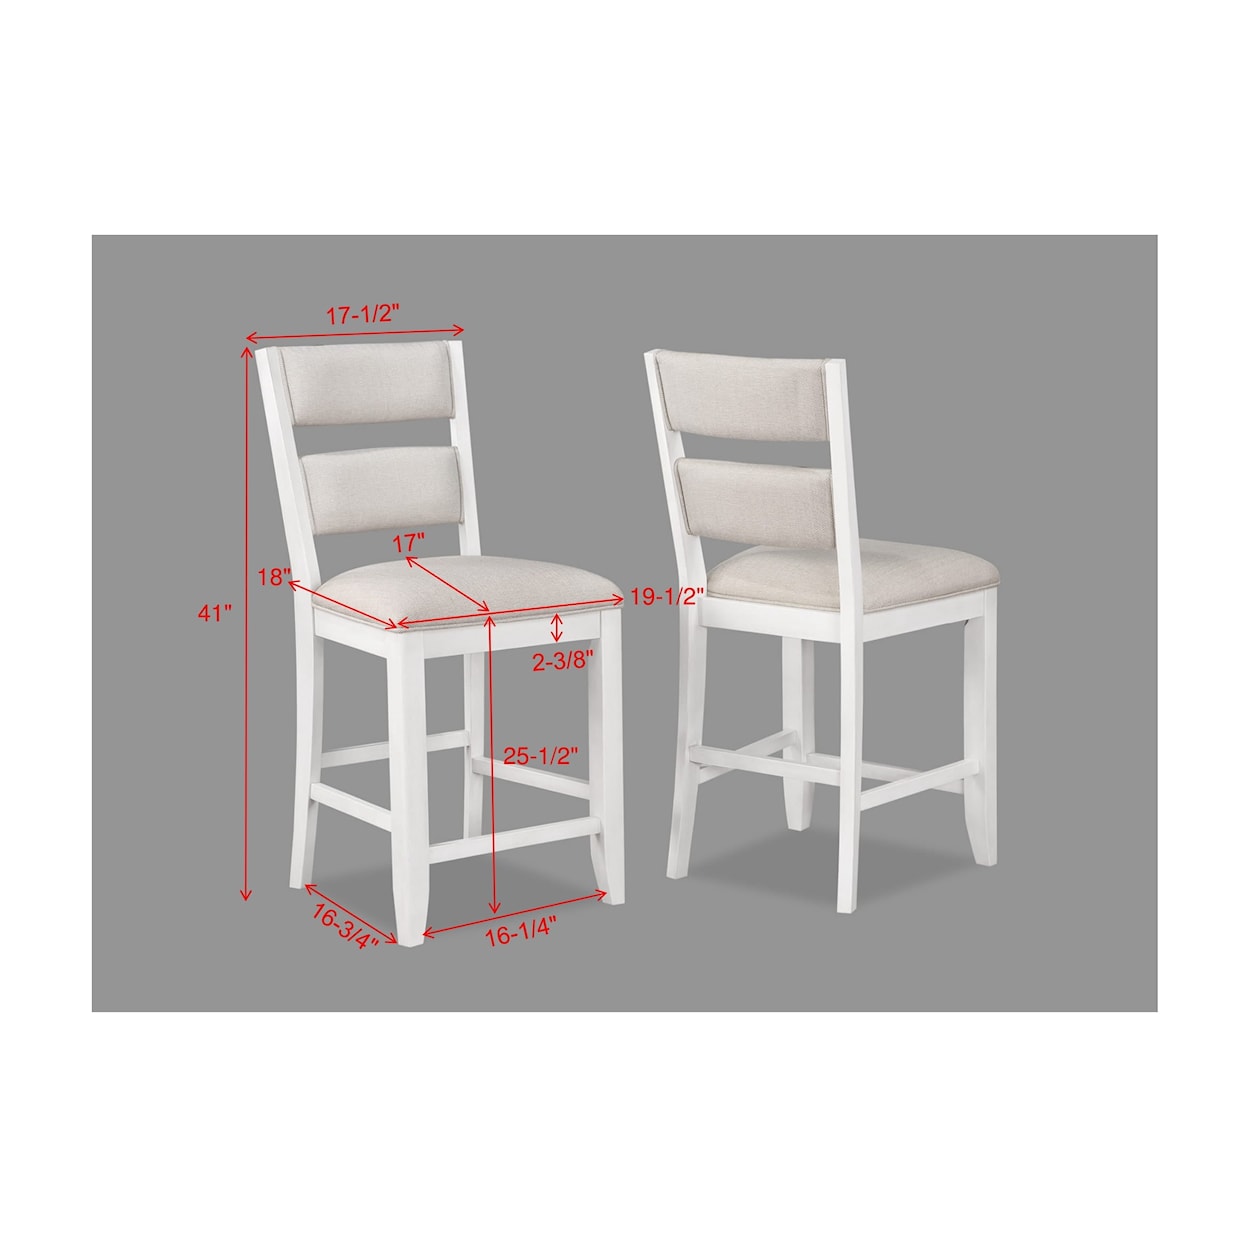 CM Wendy Wendy Counter Height Chair